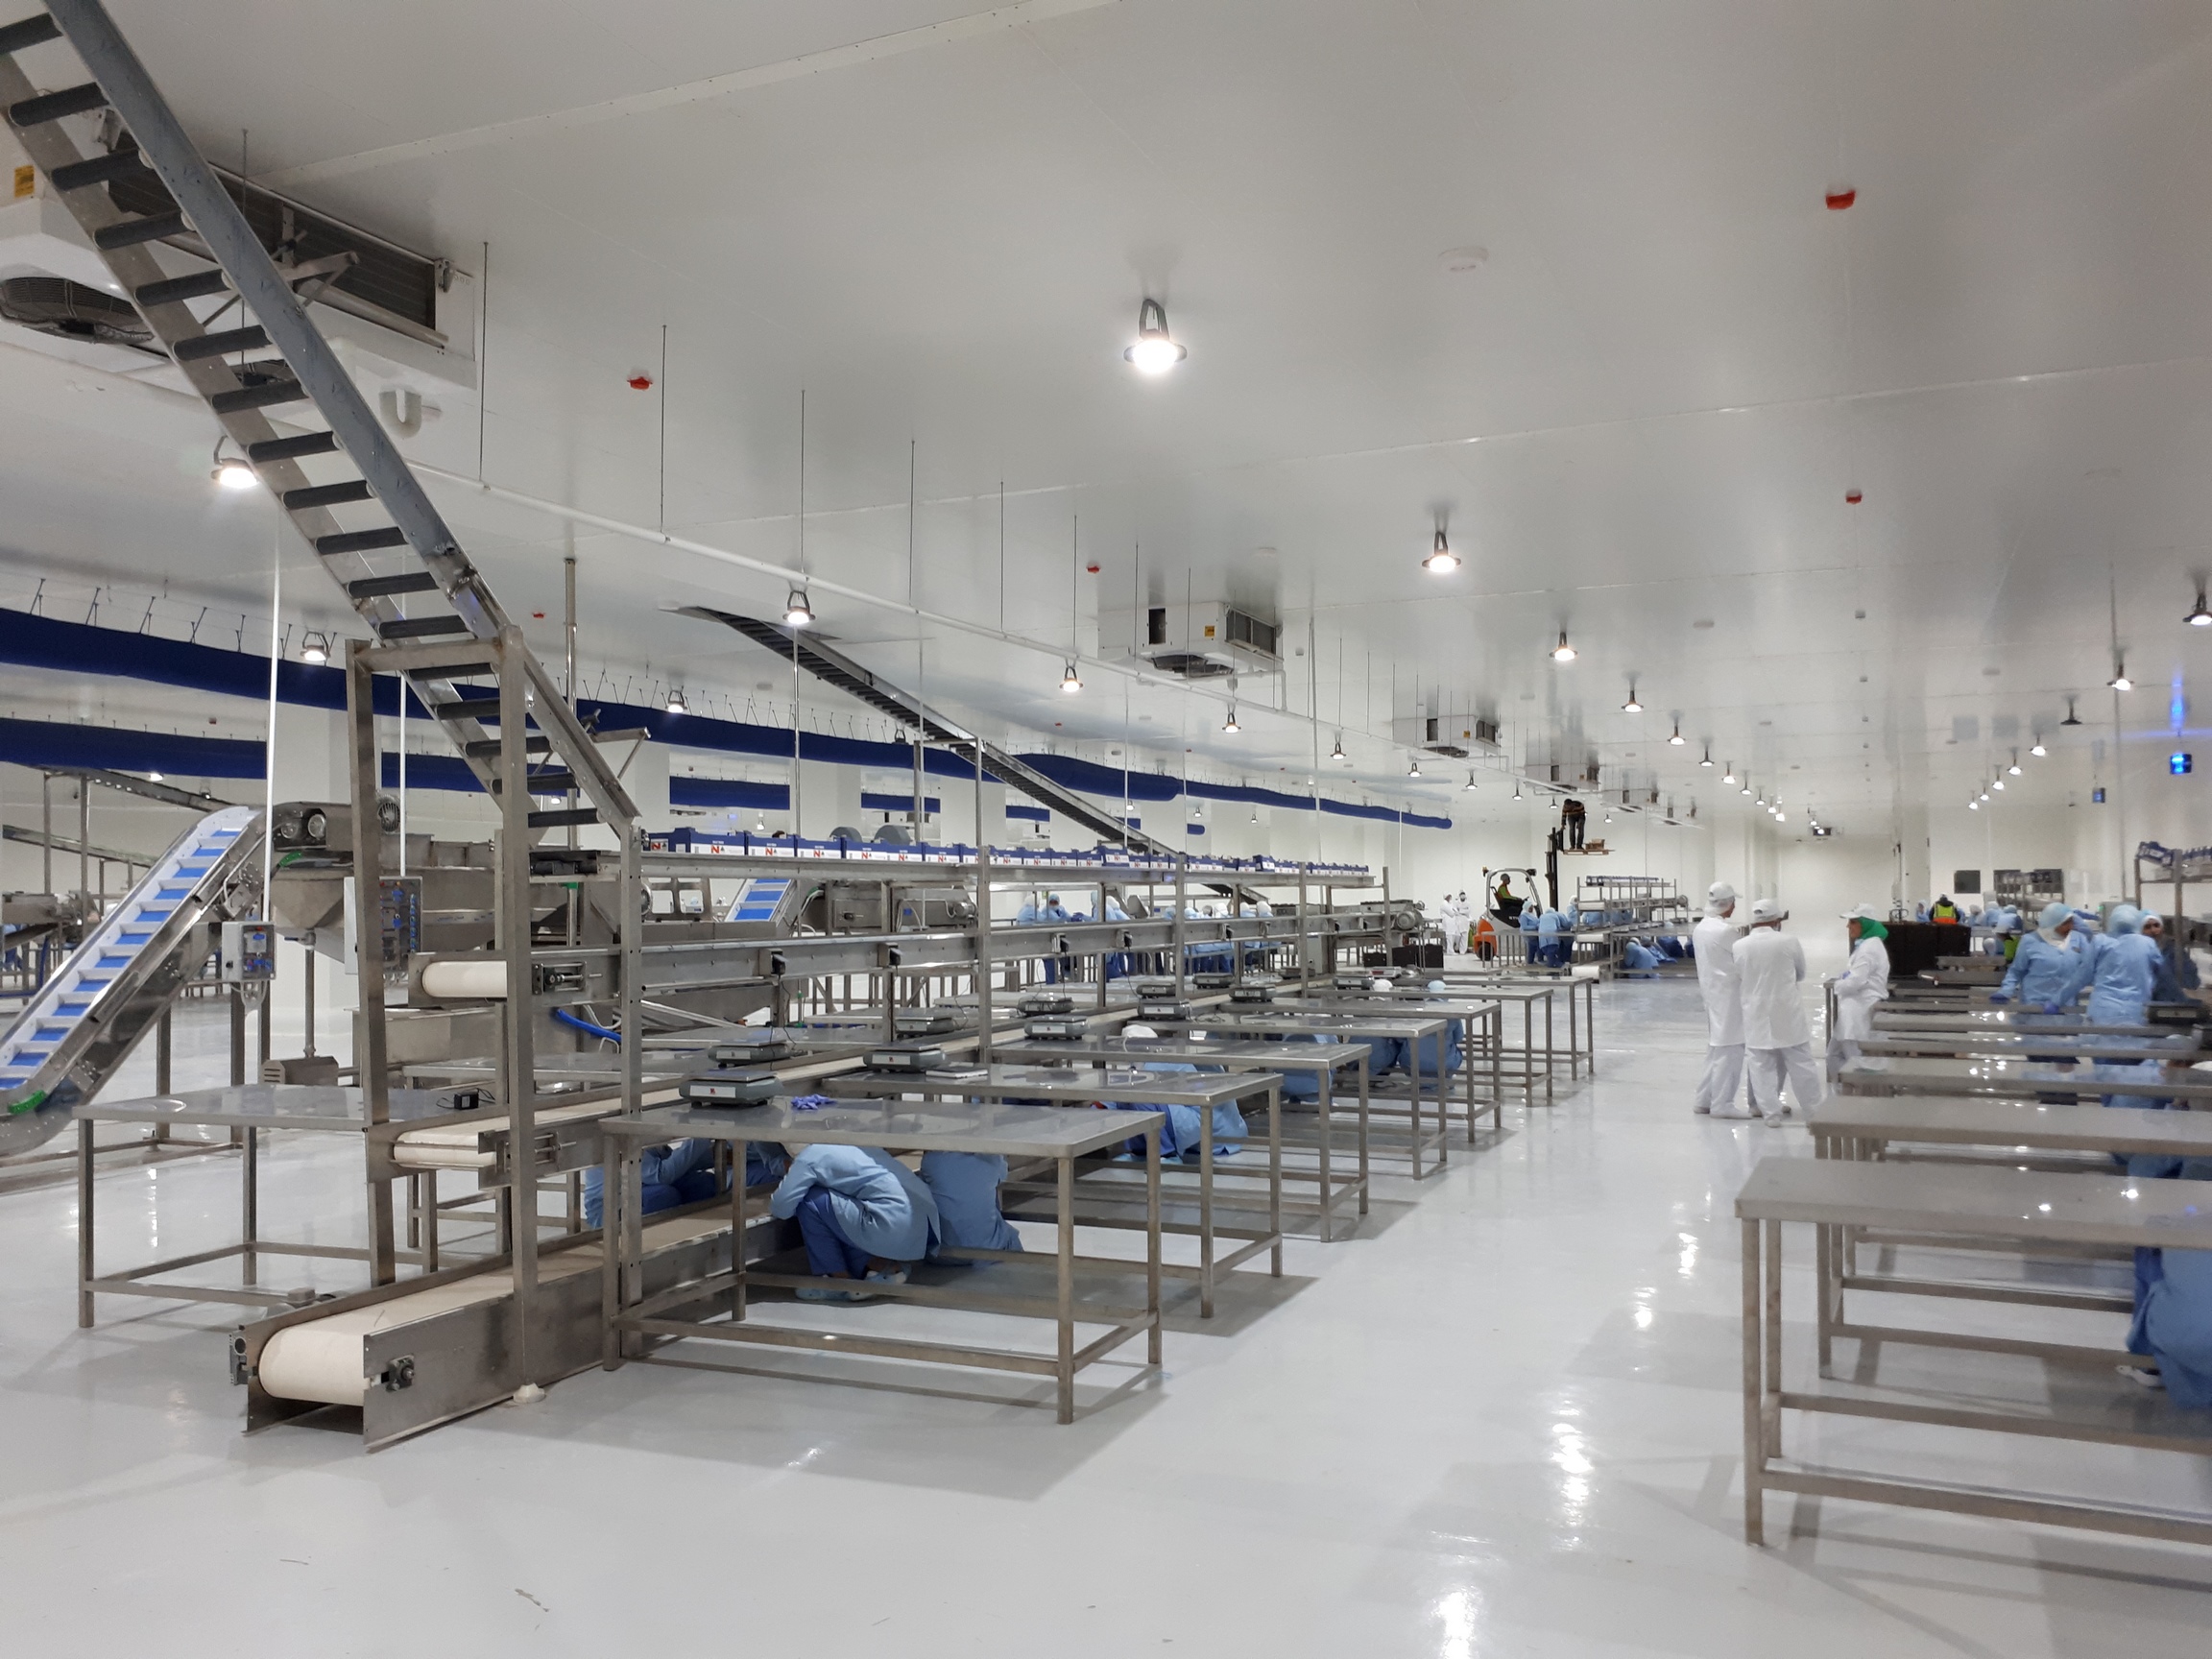 Project name: Cold store and packaging facility for agri product in Cairo<br/>
Refrigeration contractor: MOG for Engineering and Industry, 10th of Ramadan Industrial City, Egypt<br/>
Execution 2018<br/>
Application: facility for collection, precooling, packaging and storage of various fruits and vegetables (lemon, oranges, strawberry, peas, pomegranate etc.). This project is part of a larger plan to develop the agricultural industry of Egypt, by boosting the facilities to serve the export market (Mainly northern Europe and Russia). Currently two additional cold store are under installation and commissioning.<br/>
Cooling system description:<br/>
- Chilled receiving area: LU-VE Dual Discharge 3# CD50H 9452 N 6 - 23,7kW  (16C_85%_EV5) R407c<br/>
- 2 precooling rooms: LU-VE Cubic 4# CS71H 4416 E 10 - 67,3kW (0C_85%_EV-5C) R404a<br/>
- Production and packaging hall: LU-VE Dual Discharge 12# CD50H 9456 N 6 - 69,9kW  (18C_85%_EV5) R407c<br/>
- 6 receiving rooms: LU-VE Cubic 6# CS62H 2218 N 6 - 140,8kW (15C_85%_EV5) R407c<br/>
- 6 cold stores: LU-VE Cubic 12# F50HC 1714 E 6 - 31,2kW (0C_85%_EV-5C) R404a<br/>
- Shipping area: LU-VE Dual Discharge 5# CD50H 9452 N 6 -  23,7kW  (16C_85%_EV5) R404a<br/>
Rack System:<br/>
- 4# Emerson 200HP Rack for MT application R407c – 4# LU-VE Condensers EHV90F 374 H 8VENT (2X4)<br/>
- 2# Emerson 180HP Rack for LT application R404a – 2# LU-VE Condensers EAV8S 7231 H 6VENT (2X3)<br/>
- 1# Emerson 200HP Rack for LT application R404a – 1# LU-VE Condensers EHV90F 368 H 6VENT (2X3)